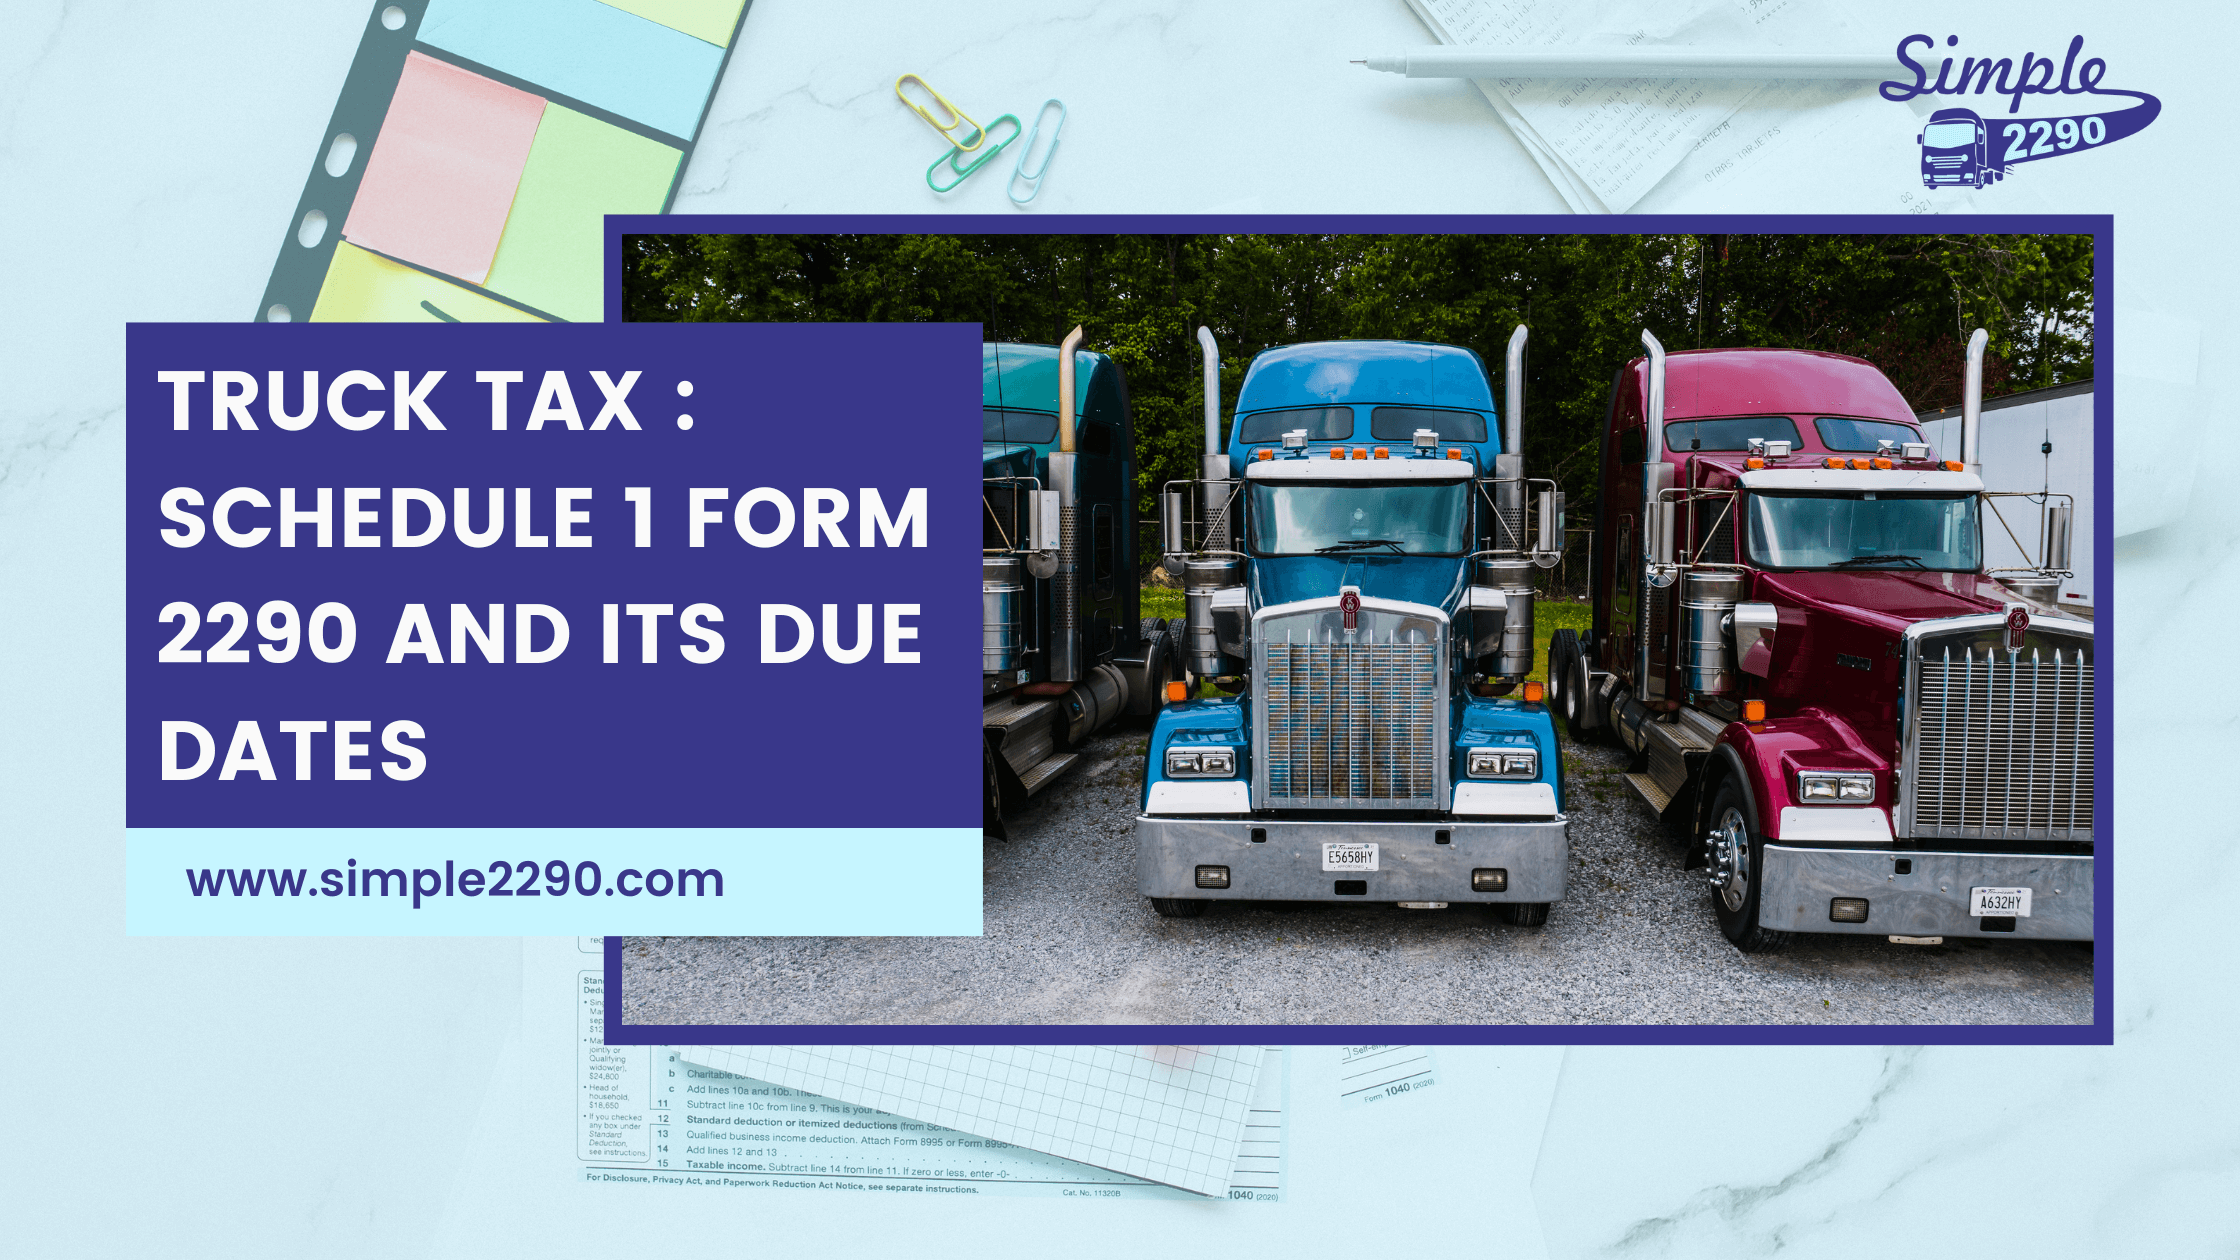 Truck Tax : Schedule 1 form 2290 and its due dates